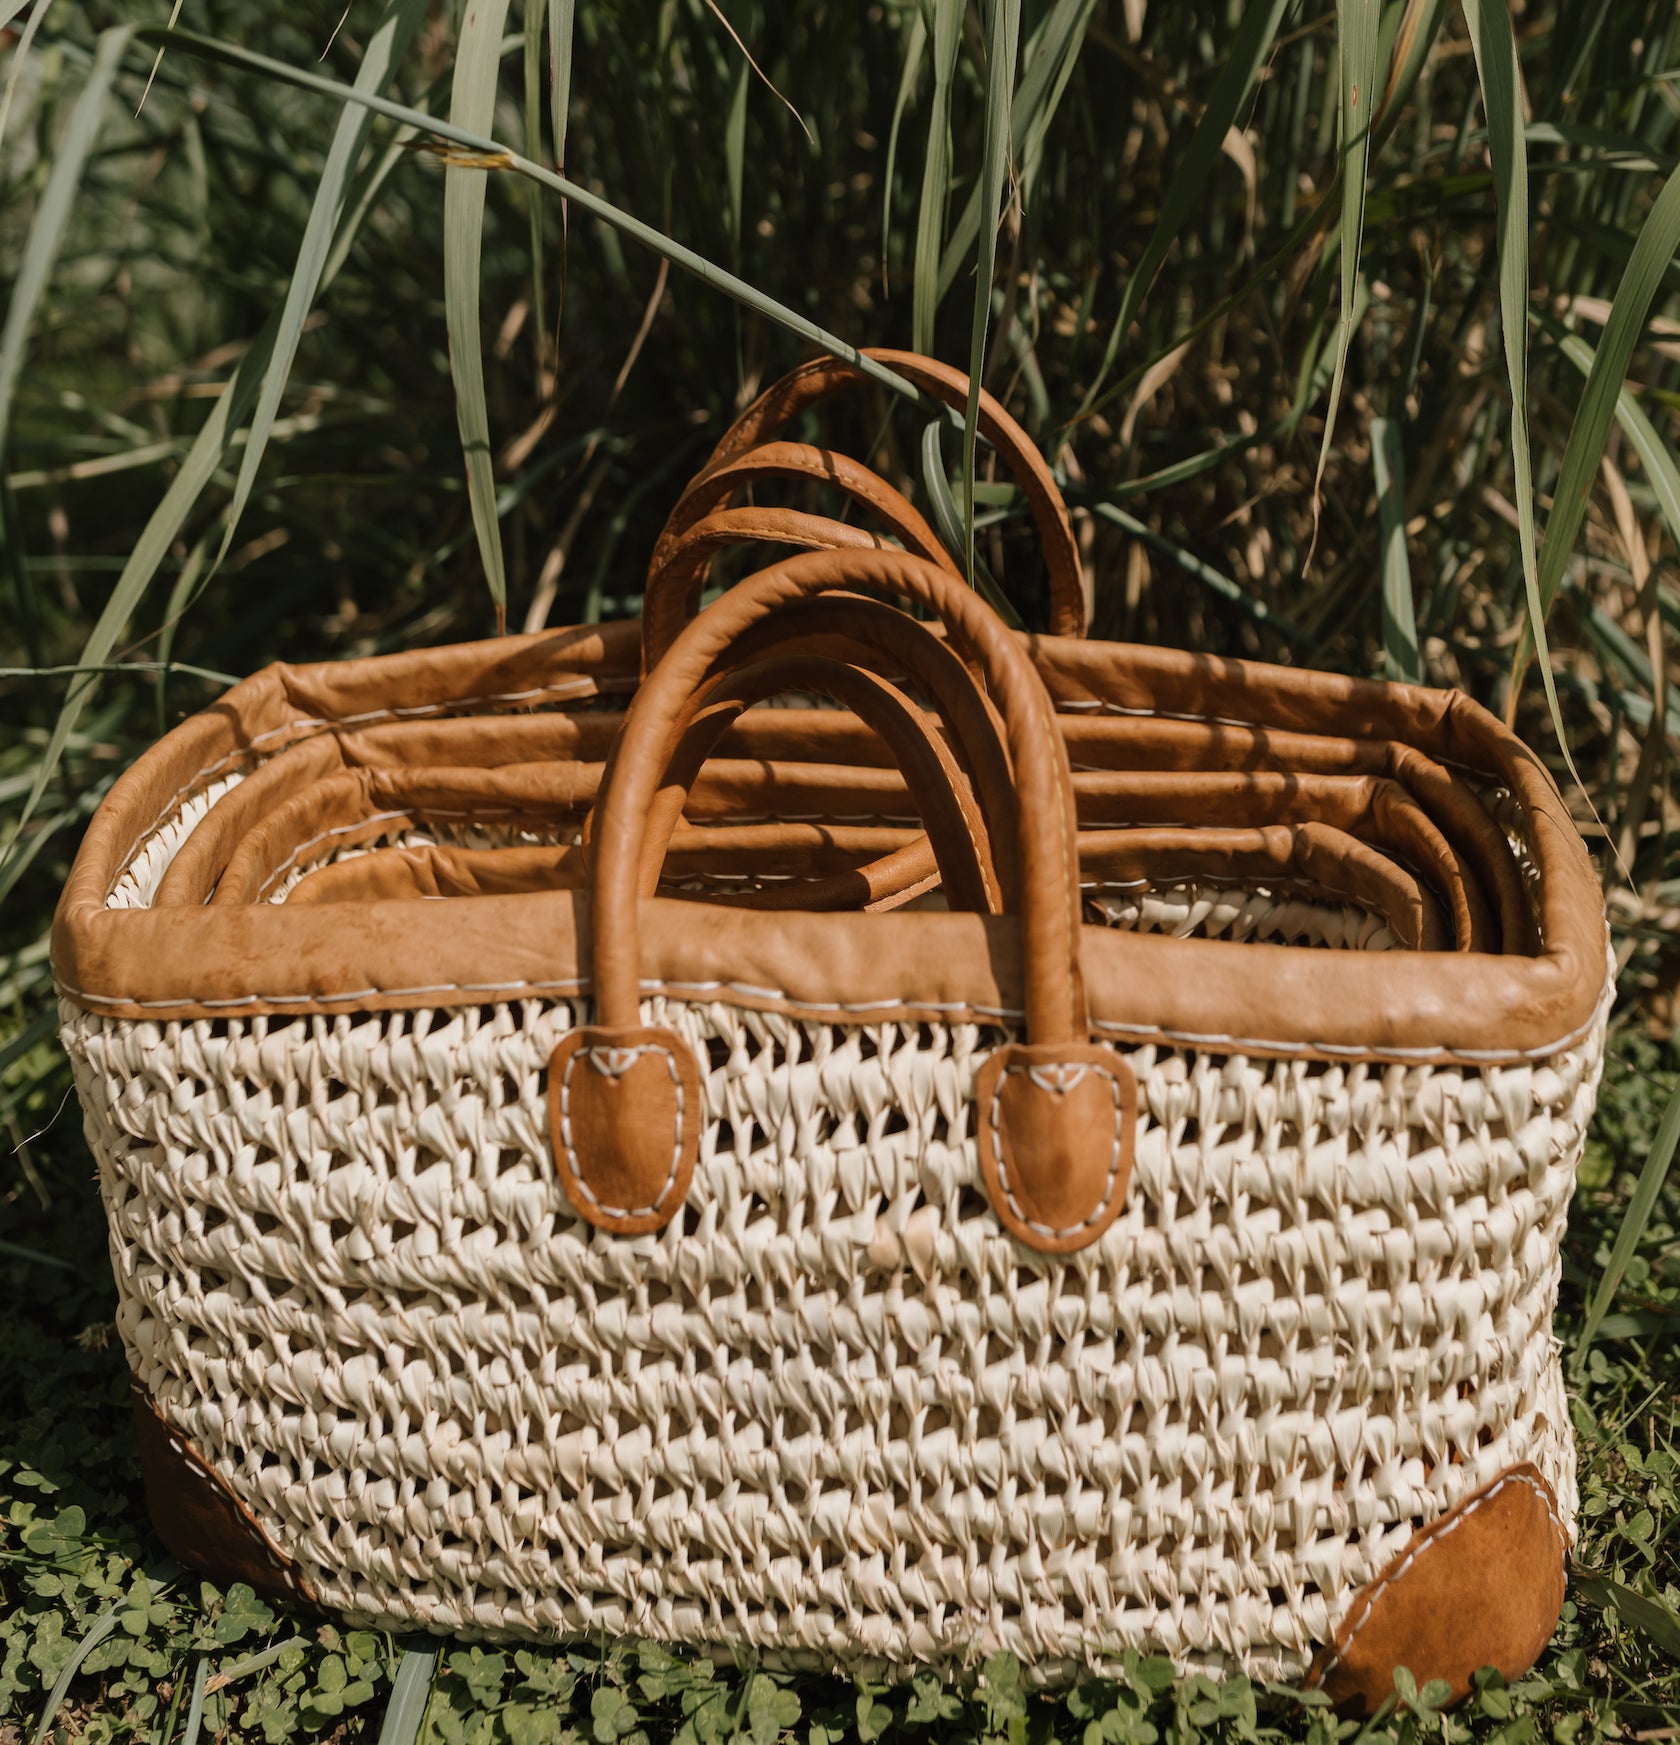 Open Weave Basket with Leather Straps and Leather Corners